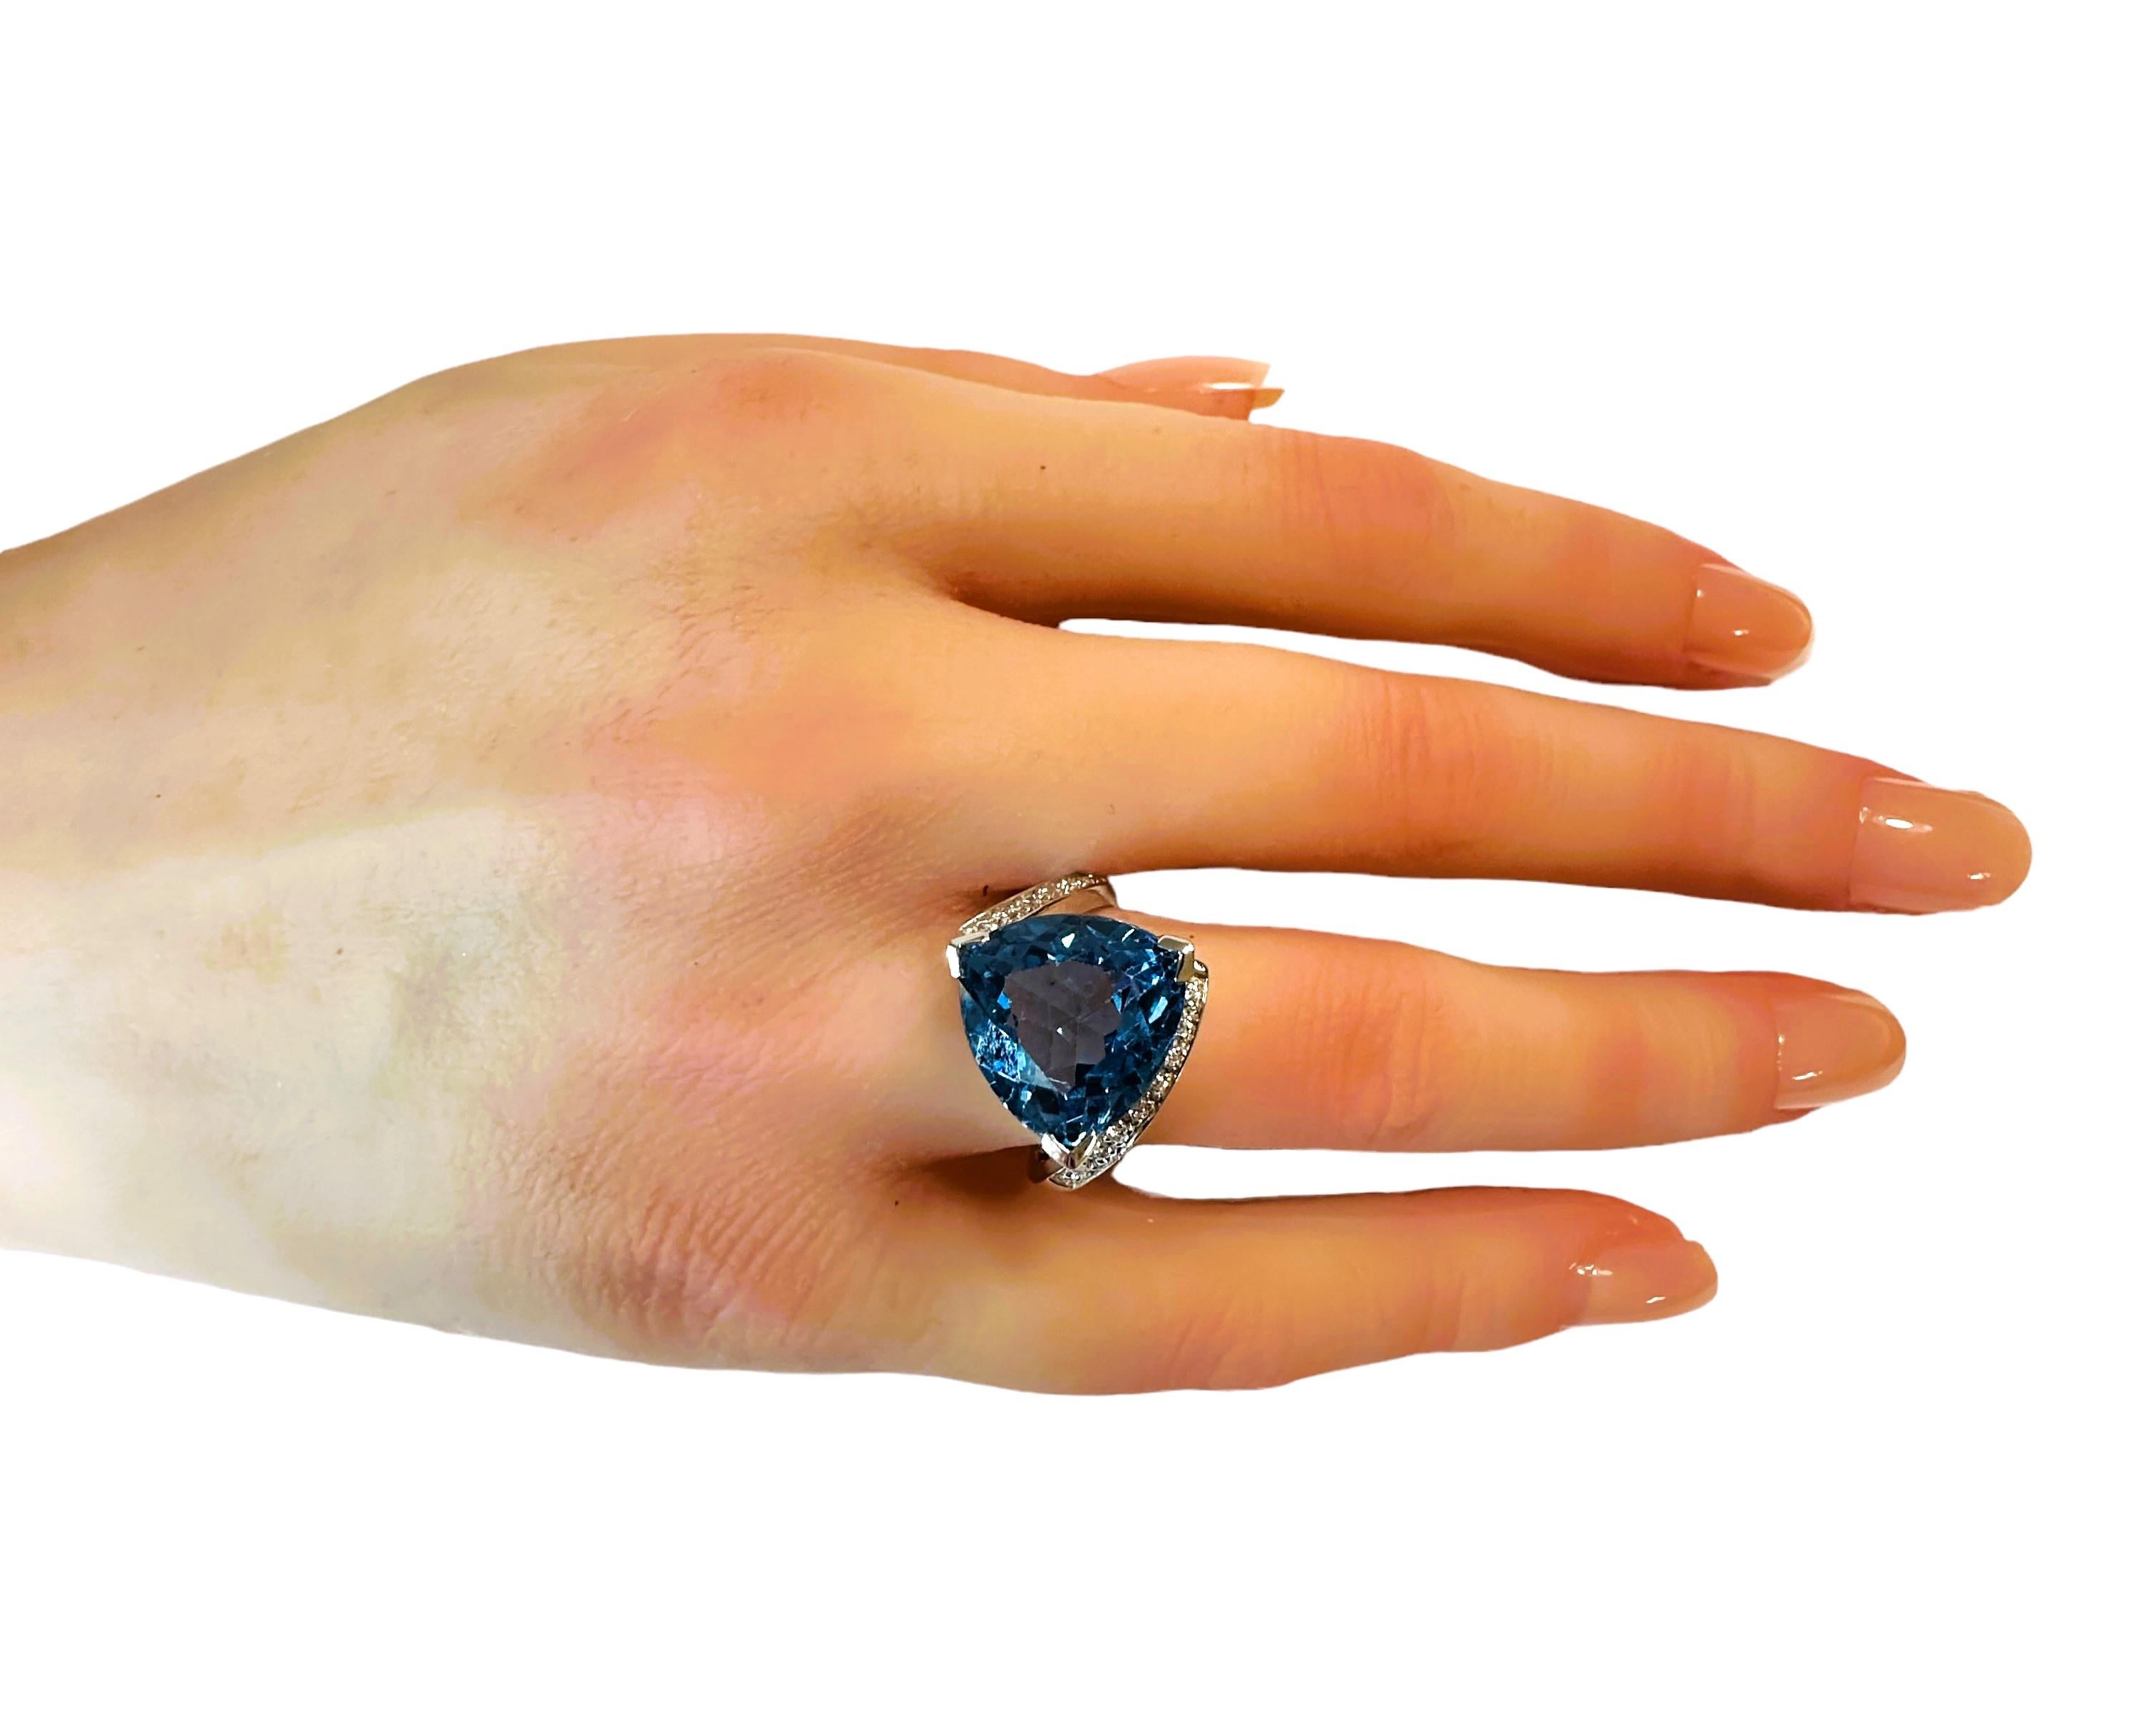 New African 10.6 Ct Swiss Blue Topaz & White Sapphire Sterling Ring For Sale 2